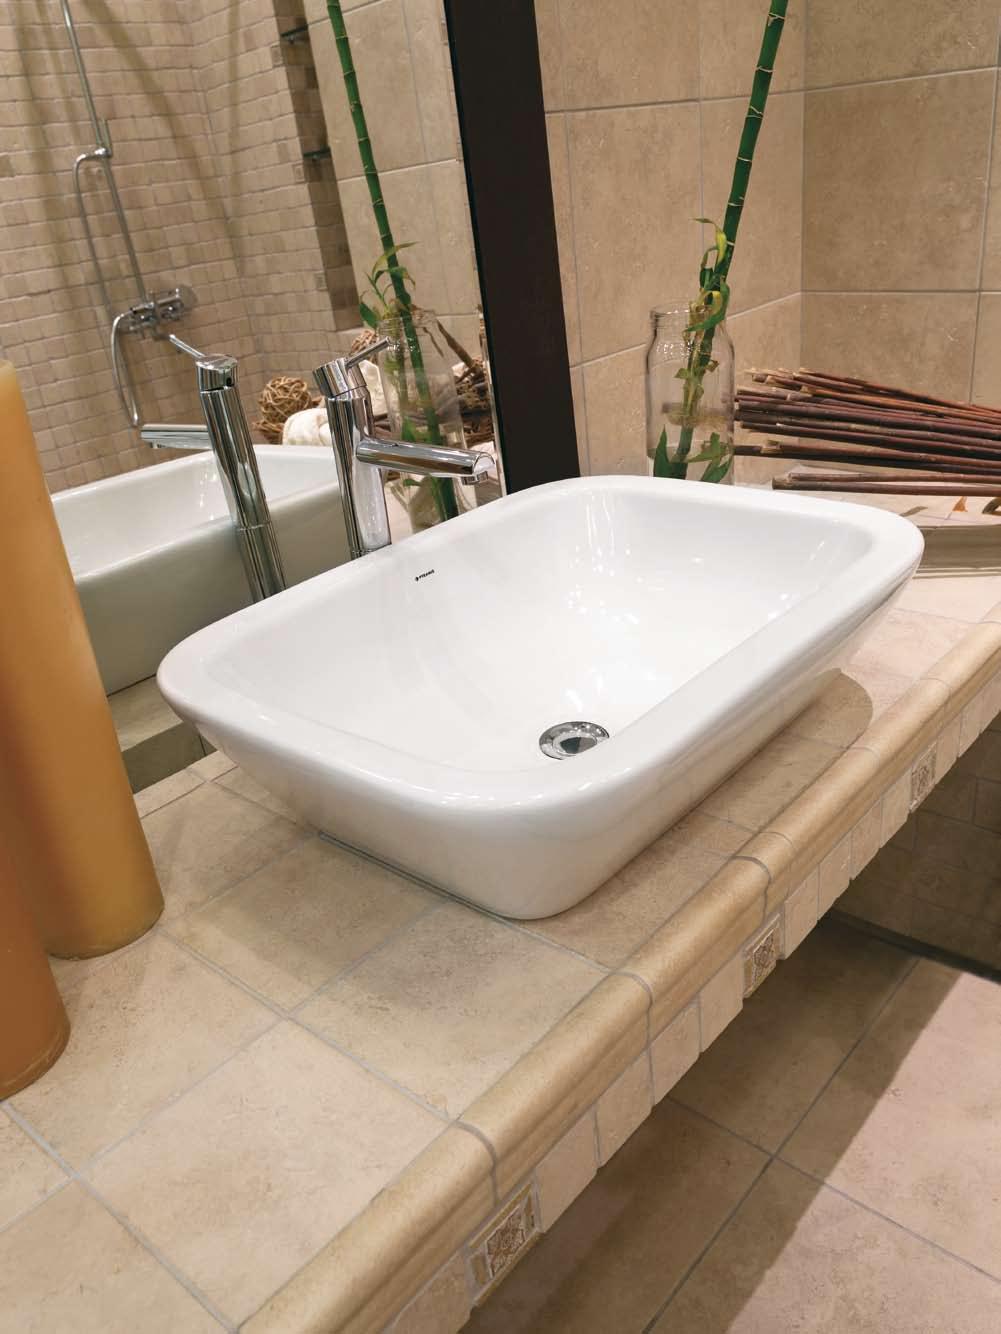 ERETRIA Eretria represents an exclusive choice for those who seek the ultimate design and efficiency in their bathroom.